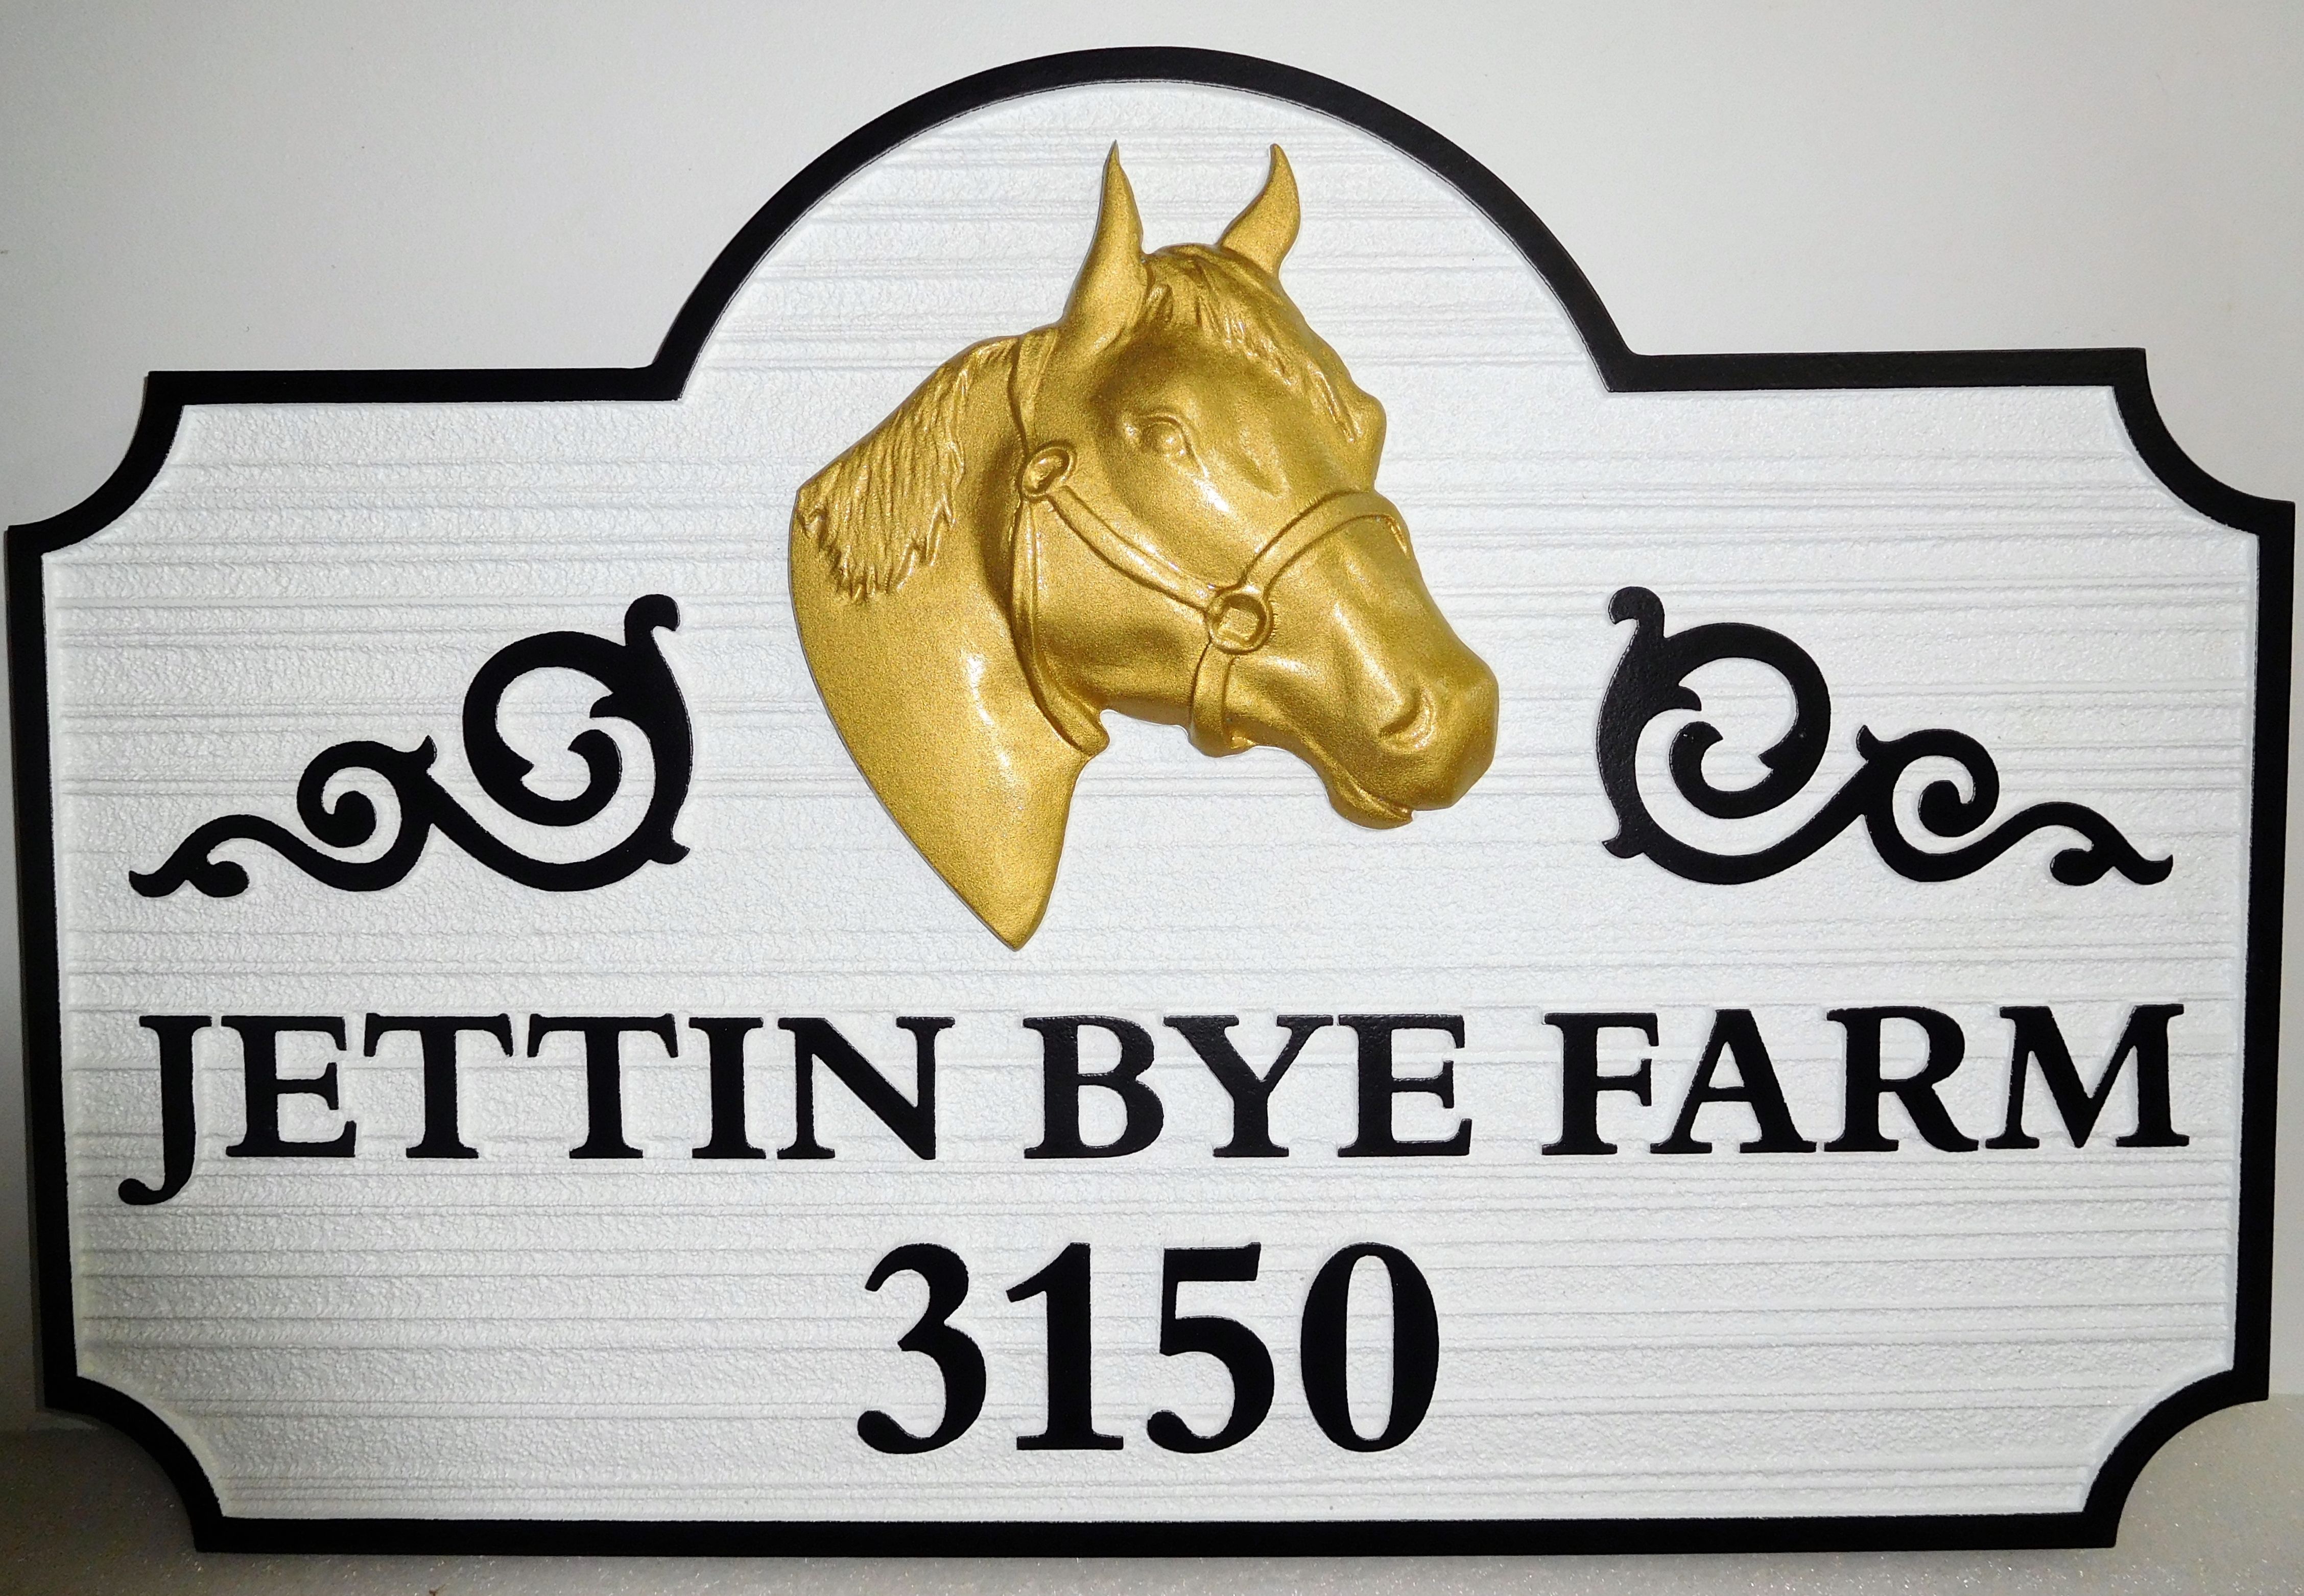 P25338 - Carved High Density Urethane Farm With Street Address Showing Horsehead in Gold Metallic Paint